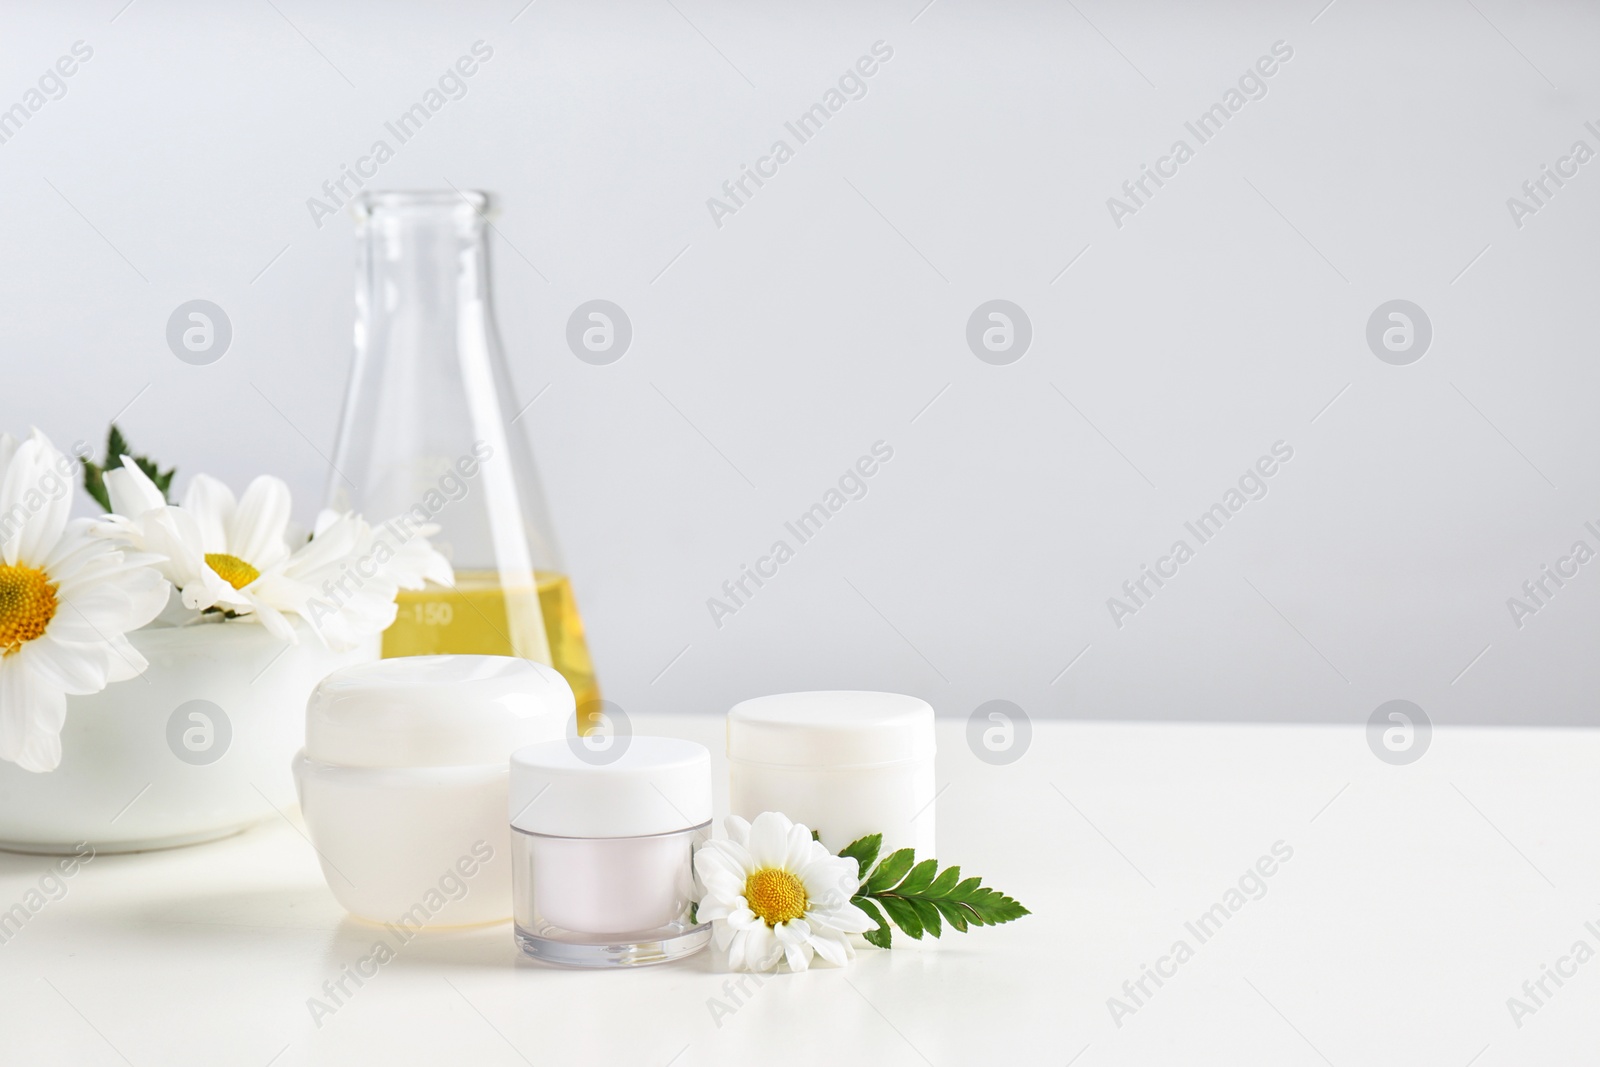 Photo of Skin care products, ingredients and laboratory glassware on table, space for text. Dermatology research